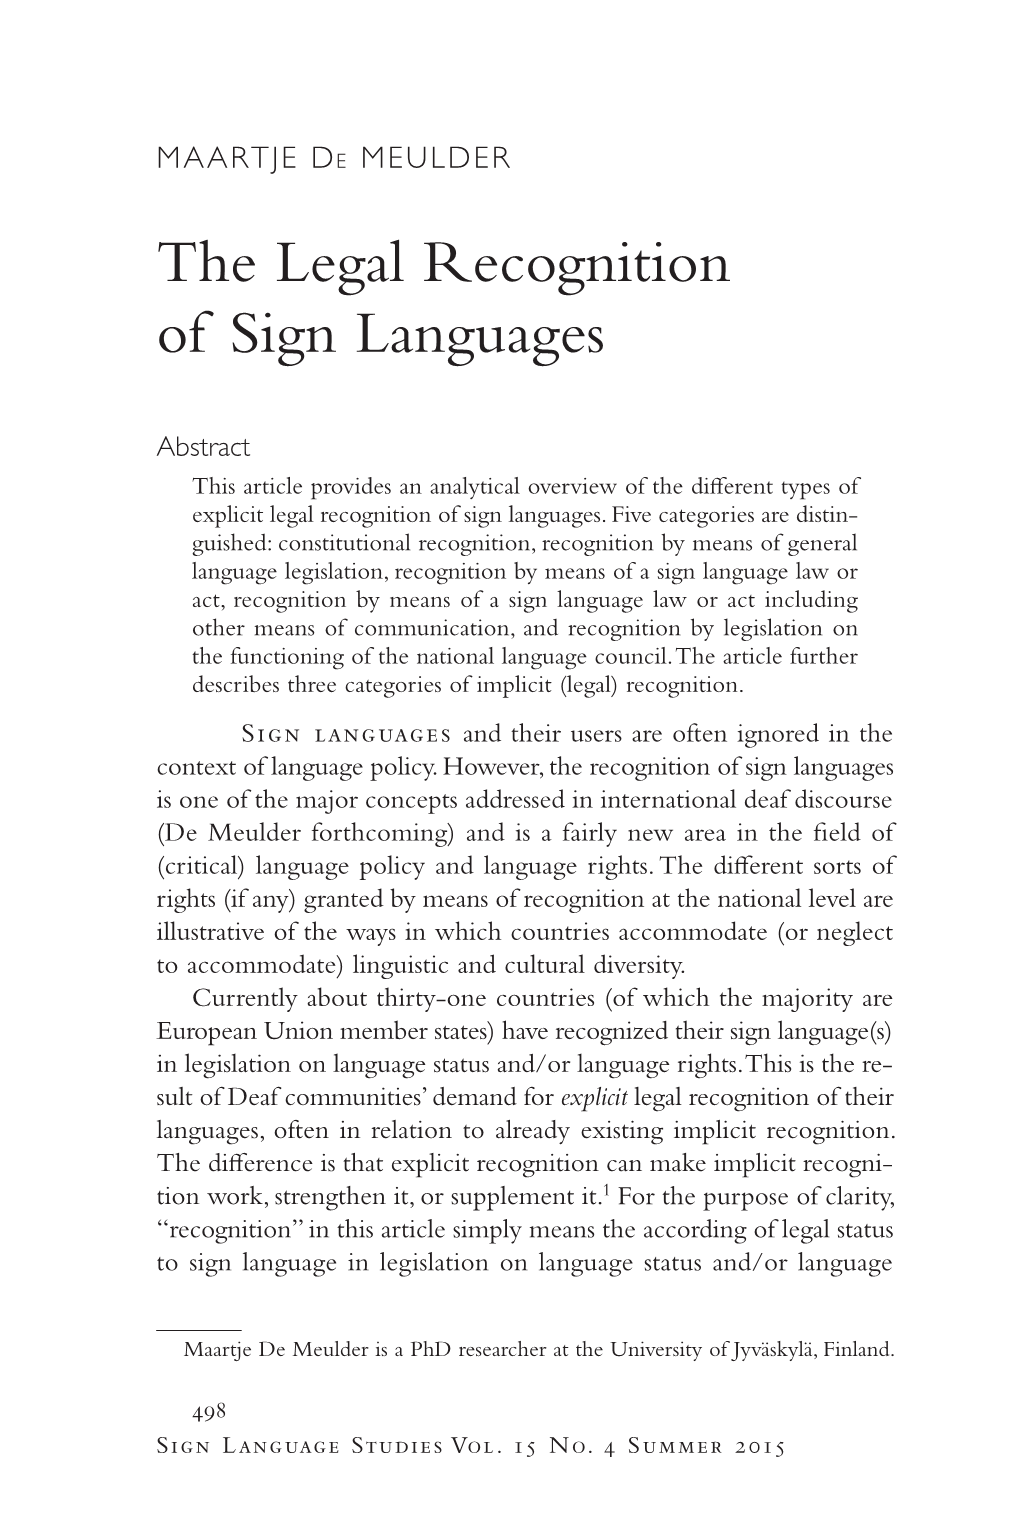 The Legal Recognition of Sign Languages